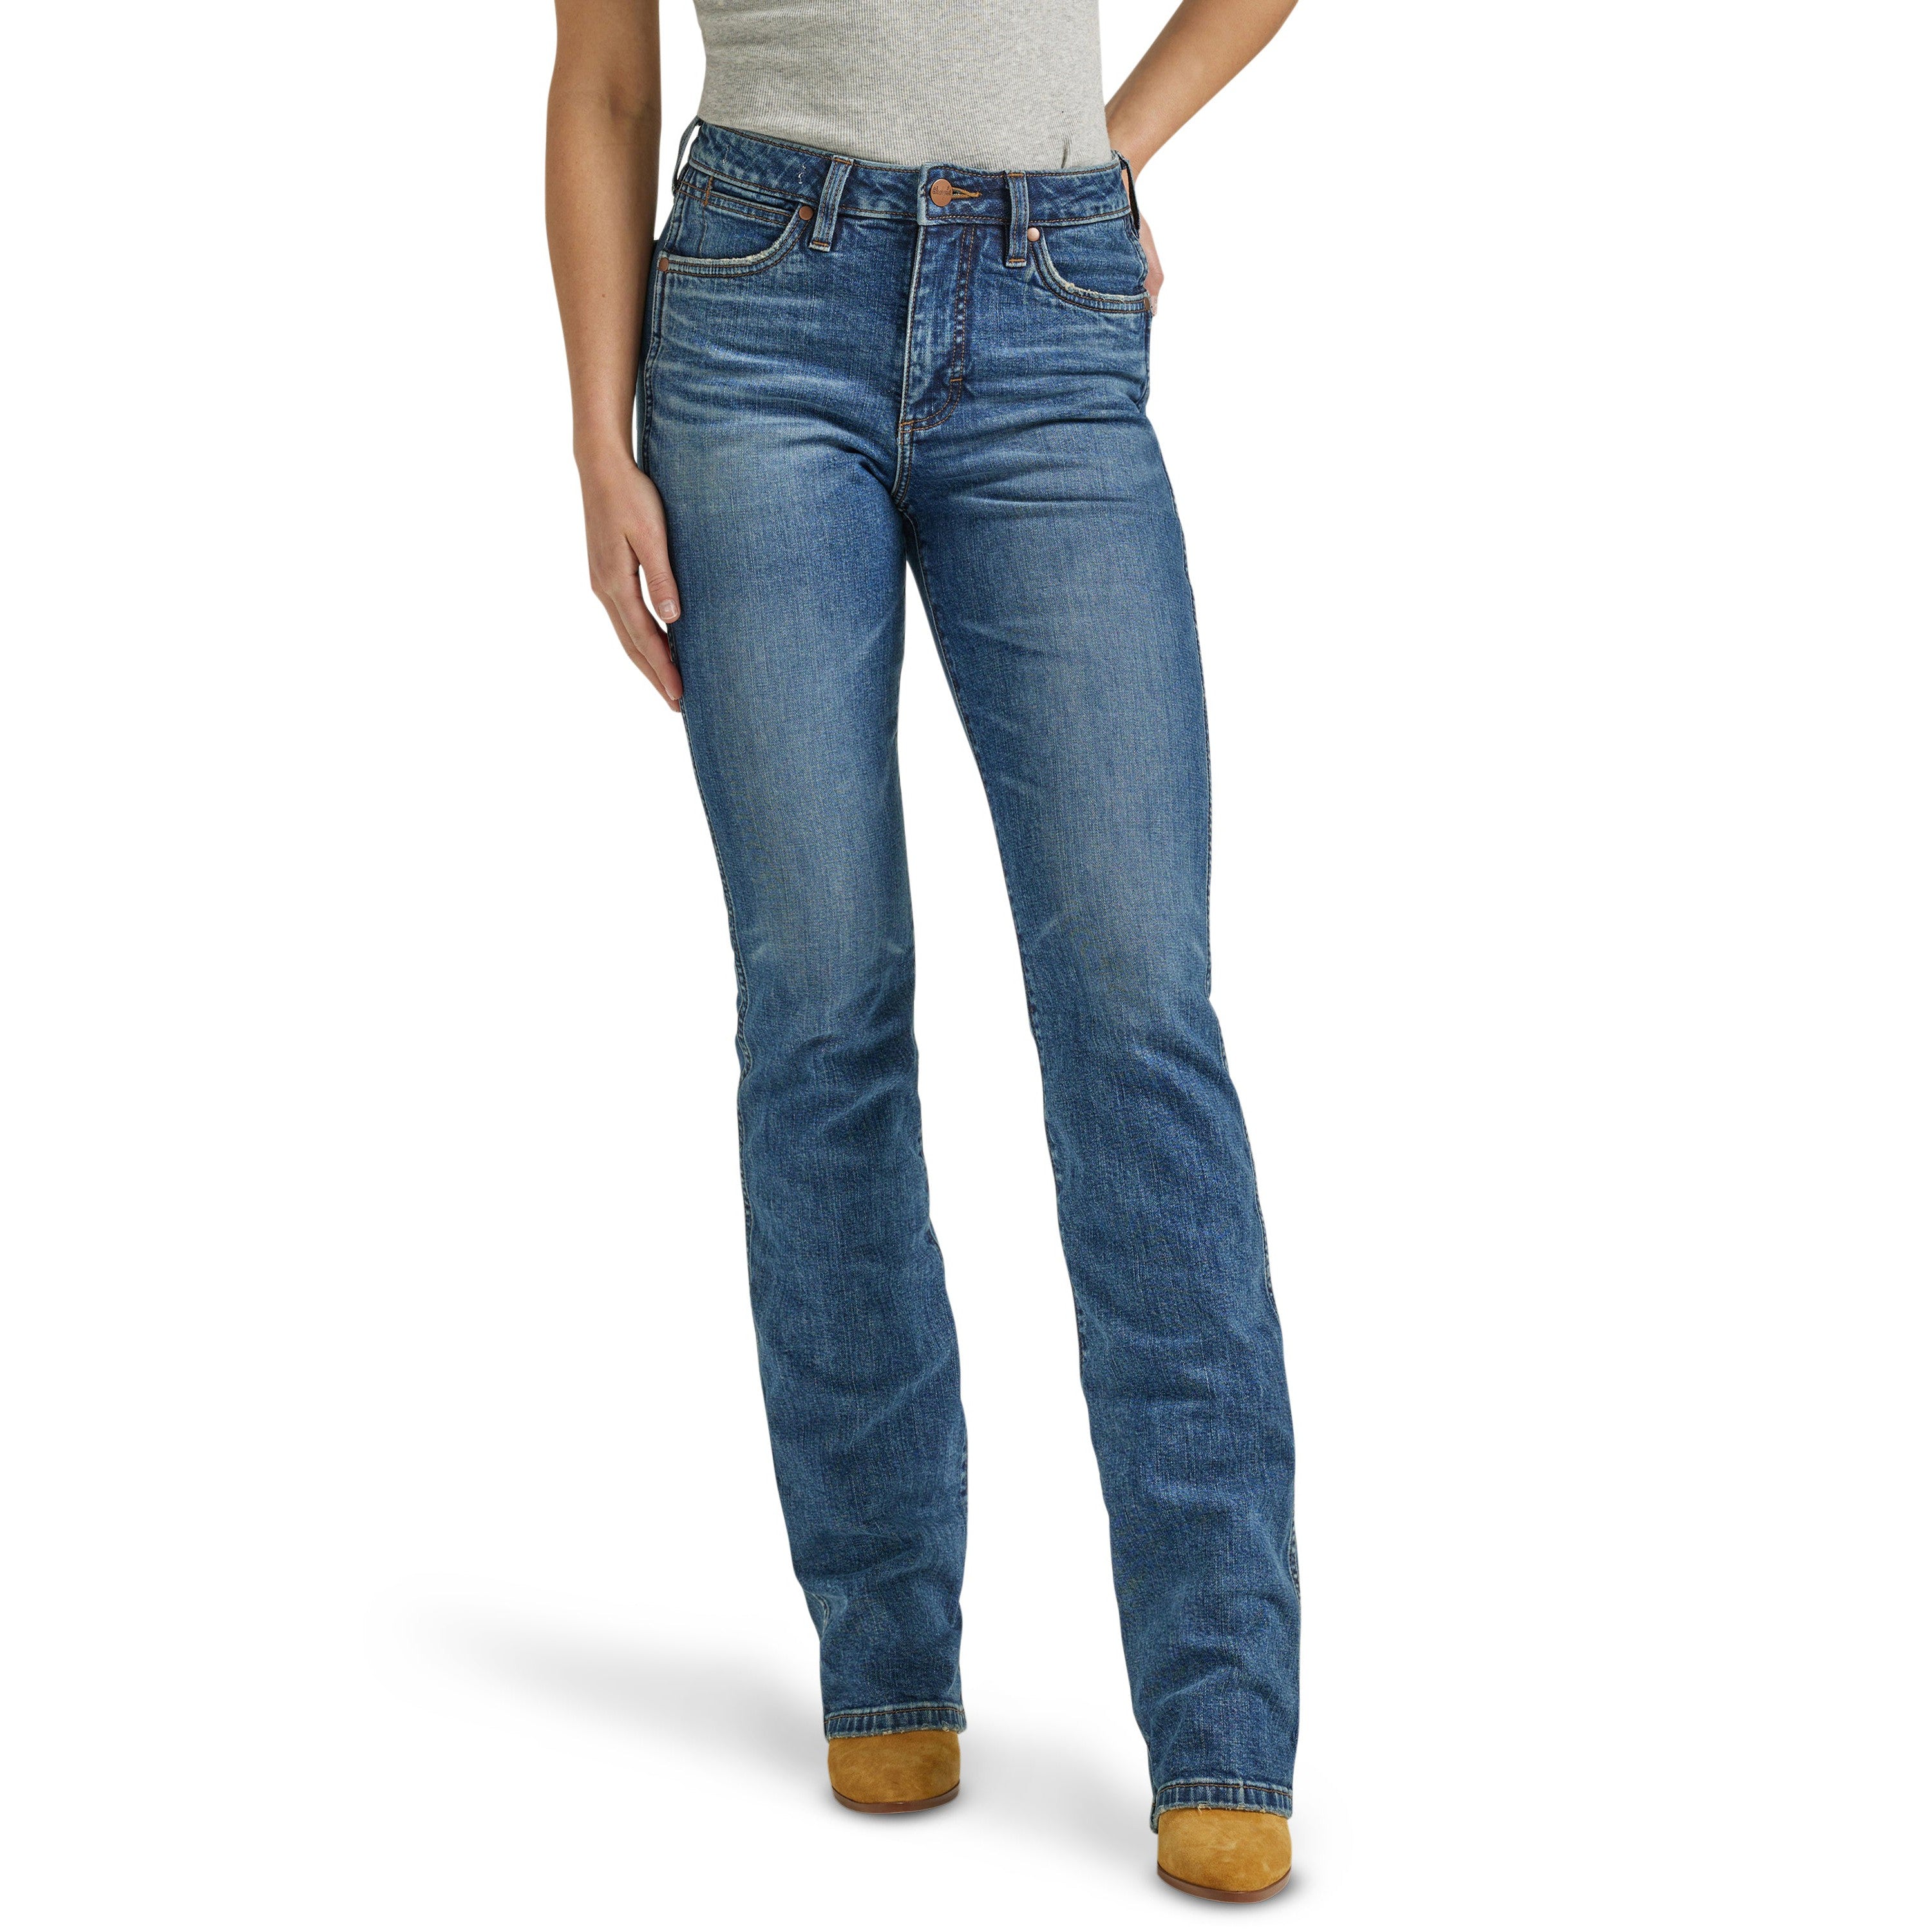 Wrangler® High Rise Bold Stretch Bootcut Jeans